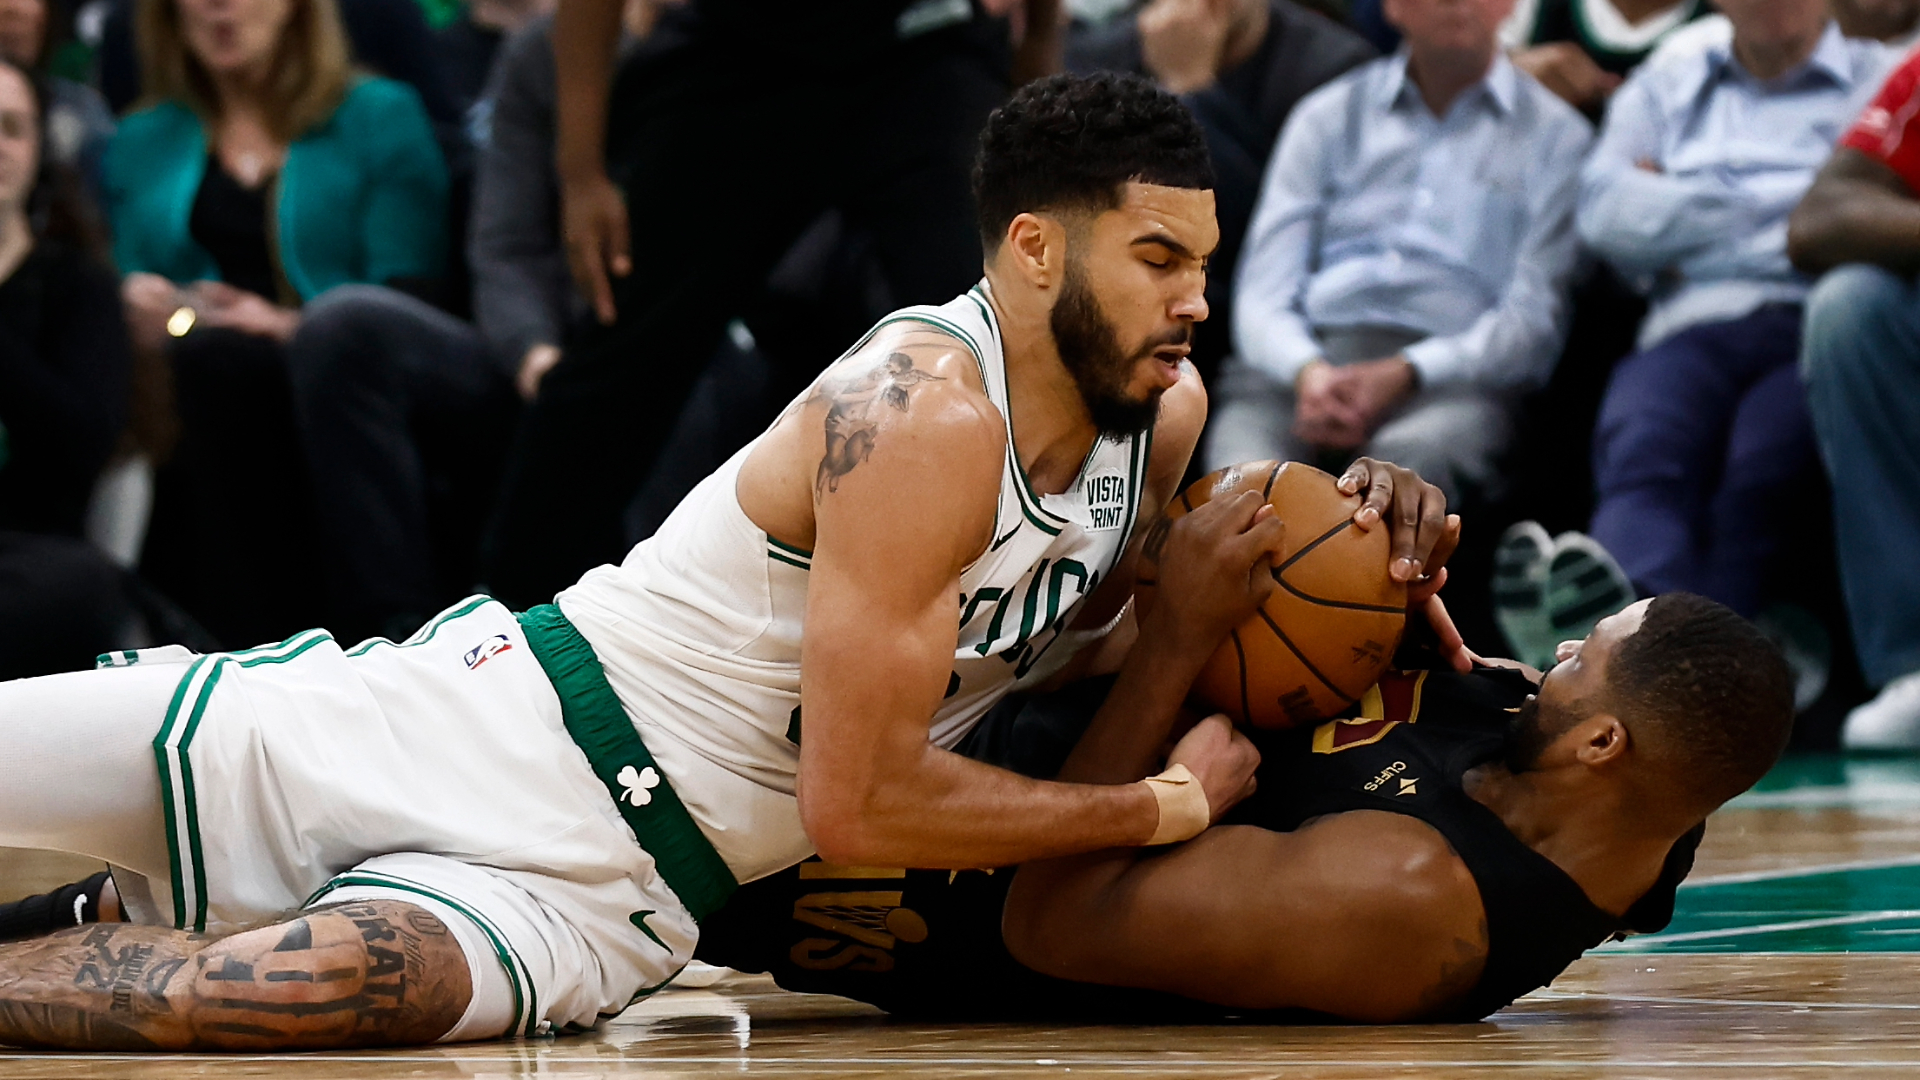 Jayson Tatum’s Playoff Struggles With Celtics Not Cause For Concern